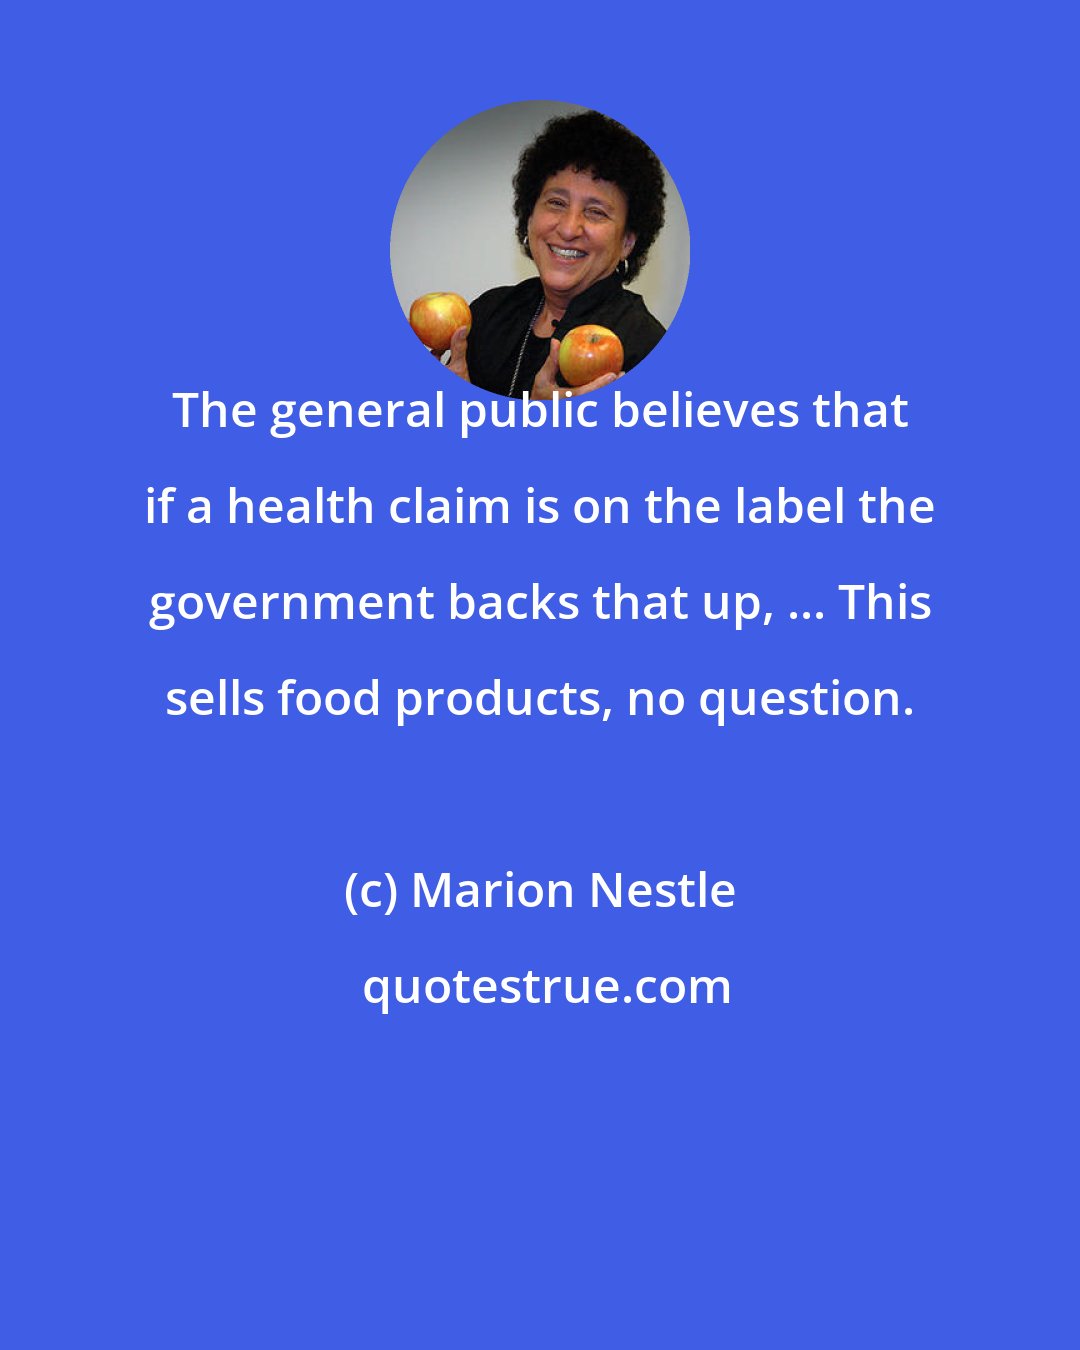 Marion Nestle: The general public believes that if a health claim is on the label the government backs that up, ... This sells food products, no question.